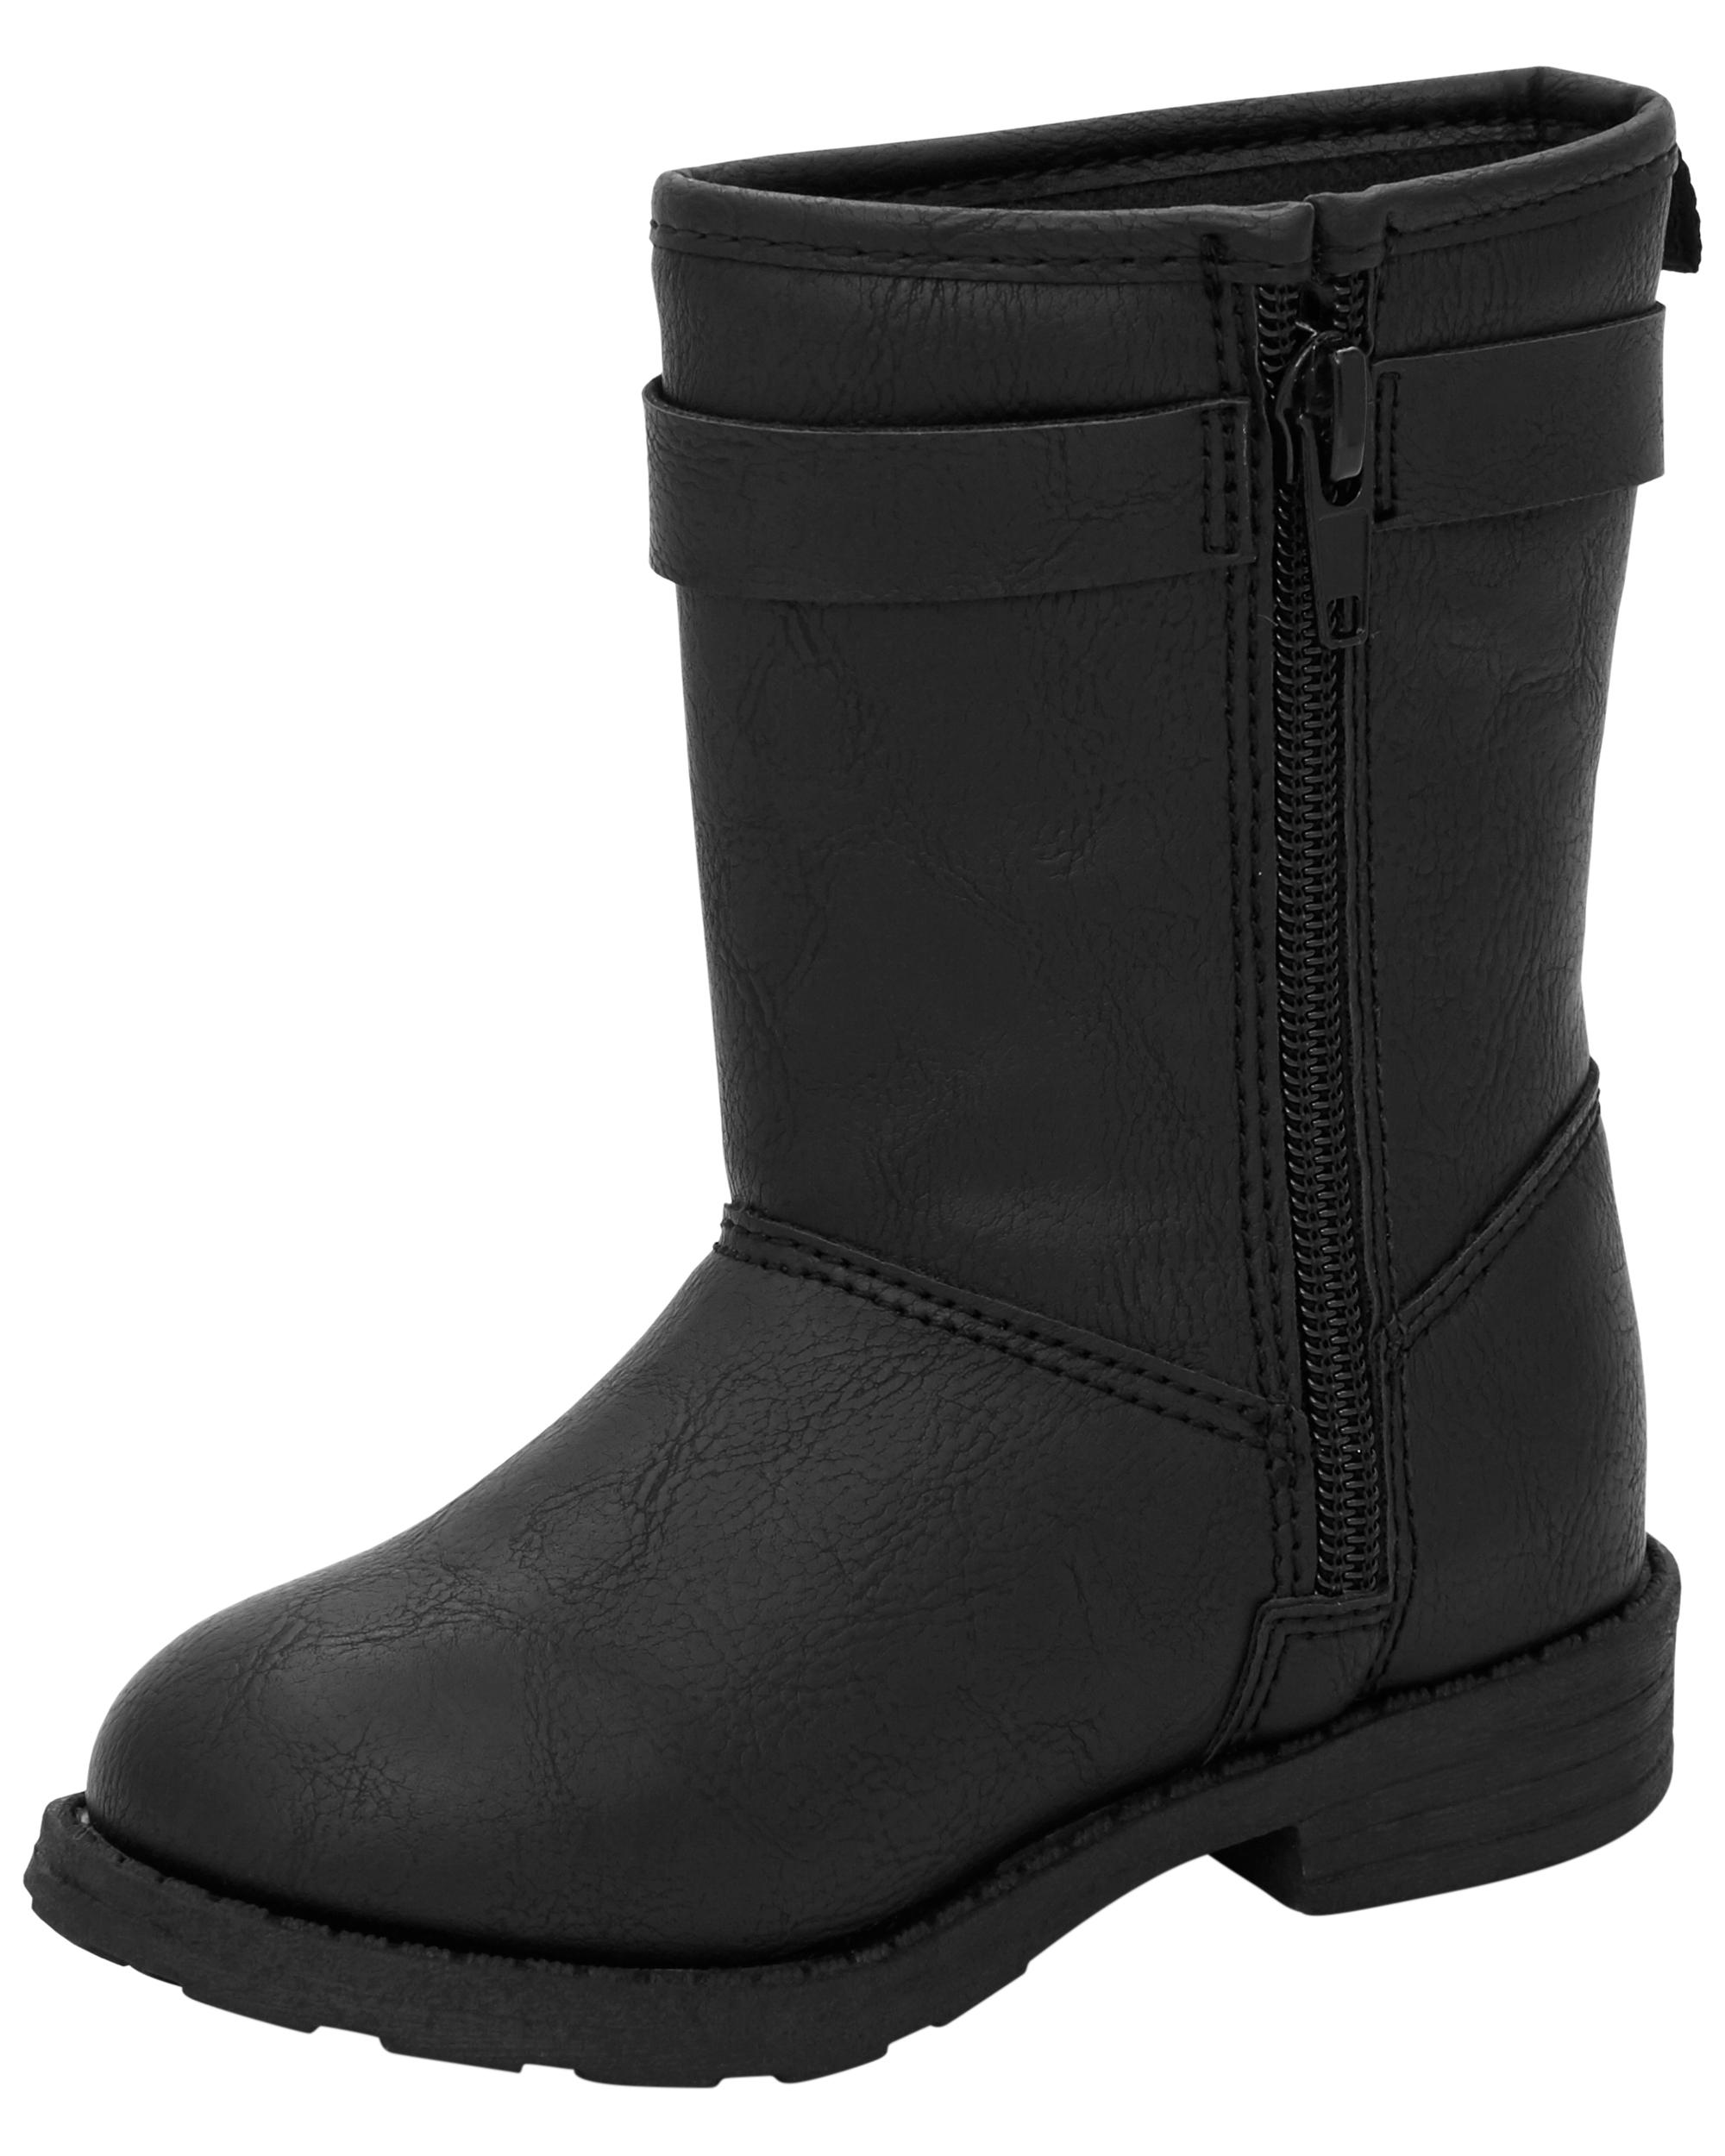 Toddler Tall Boots